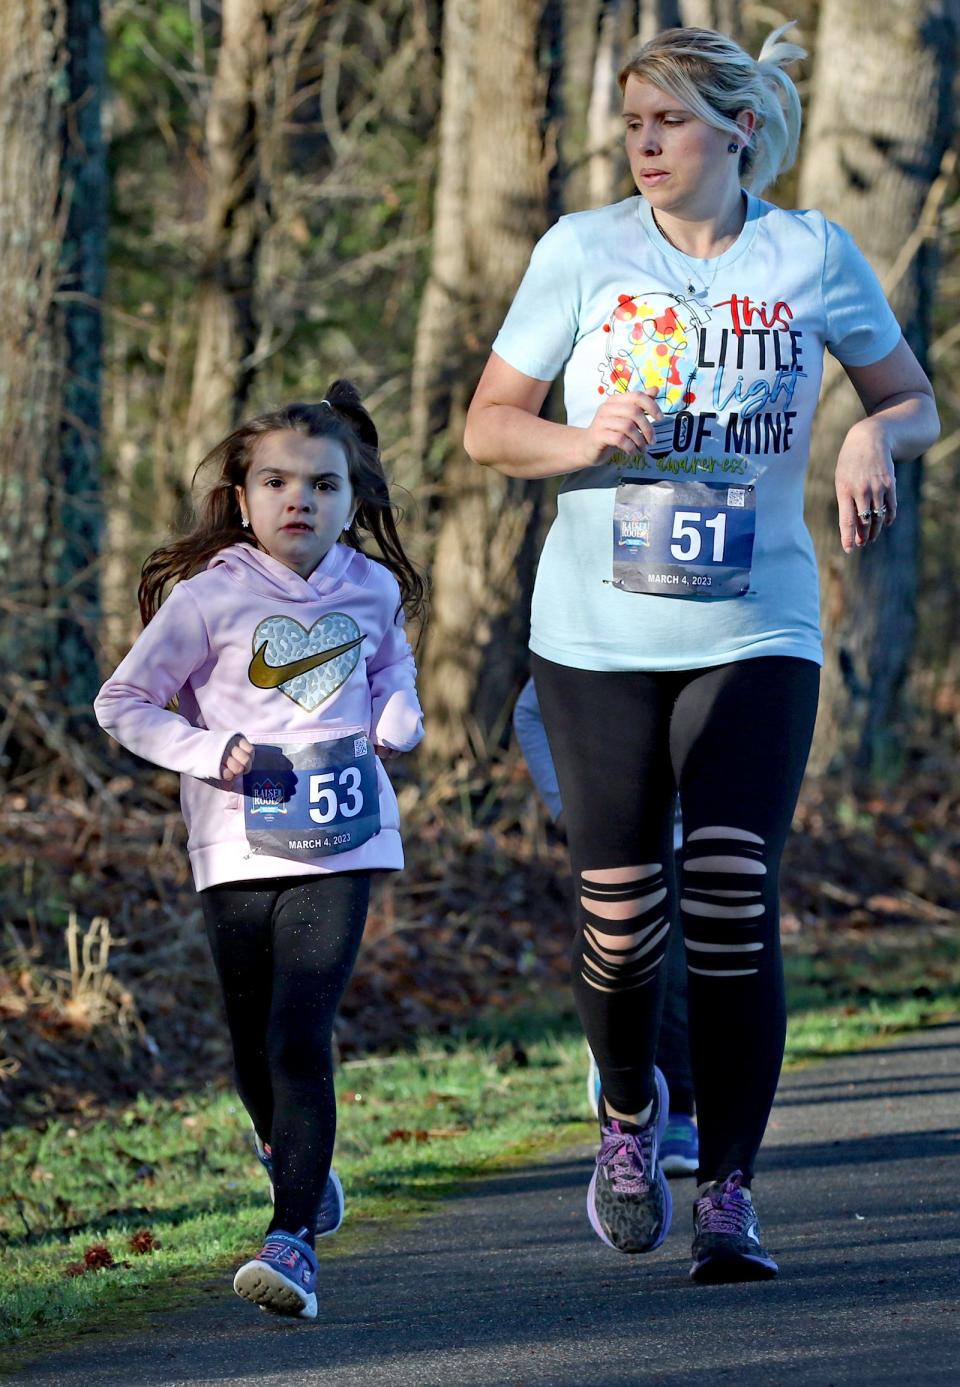 Amber Lange runs along side one of her daughters, 6-year-old Alexa Lange, during the Raise the Roof 5K early Saturday morning, March 4, 2023, at Rankin Lake Park.